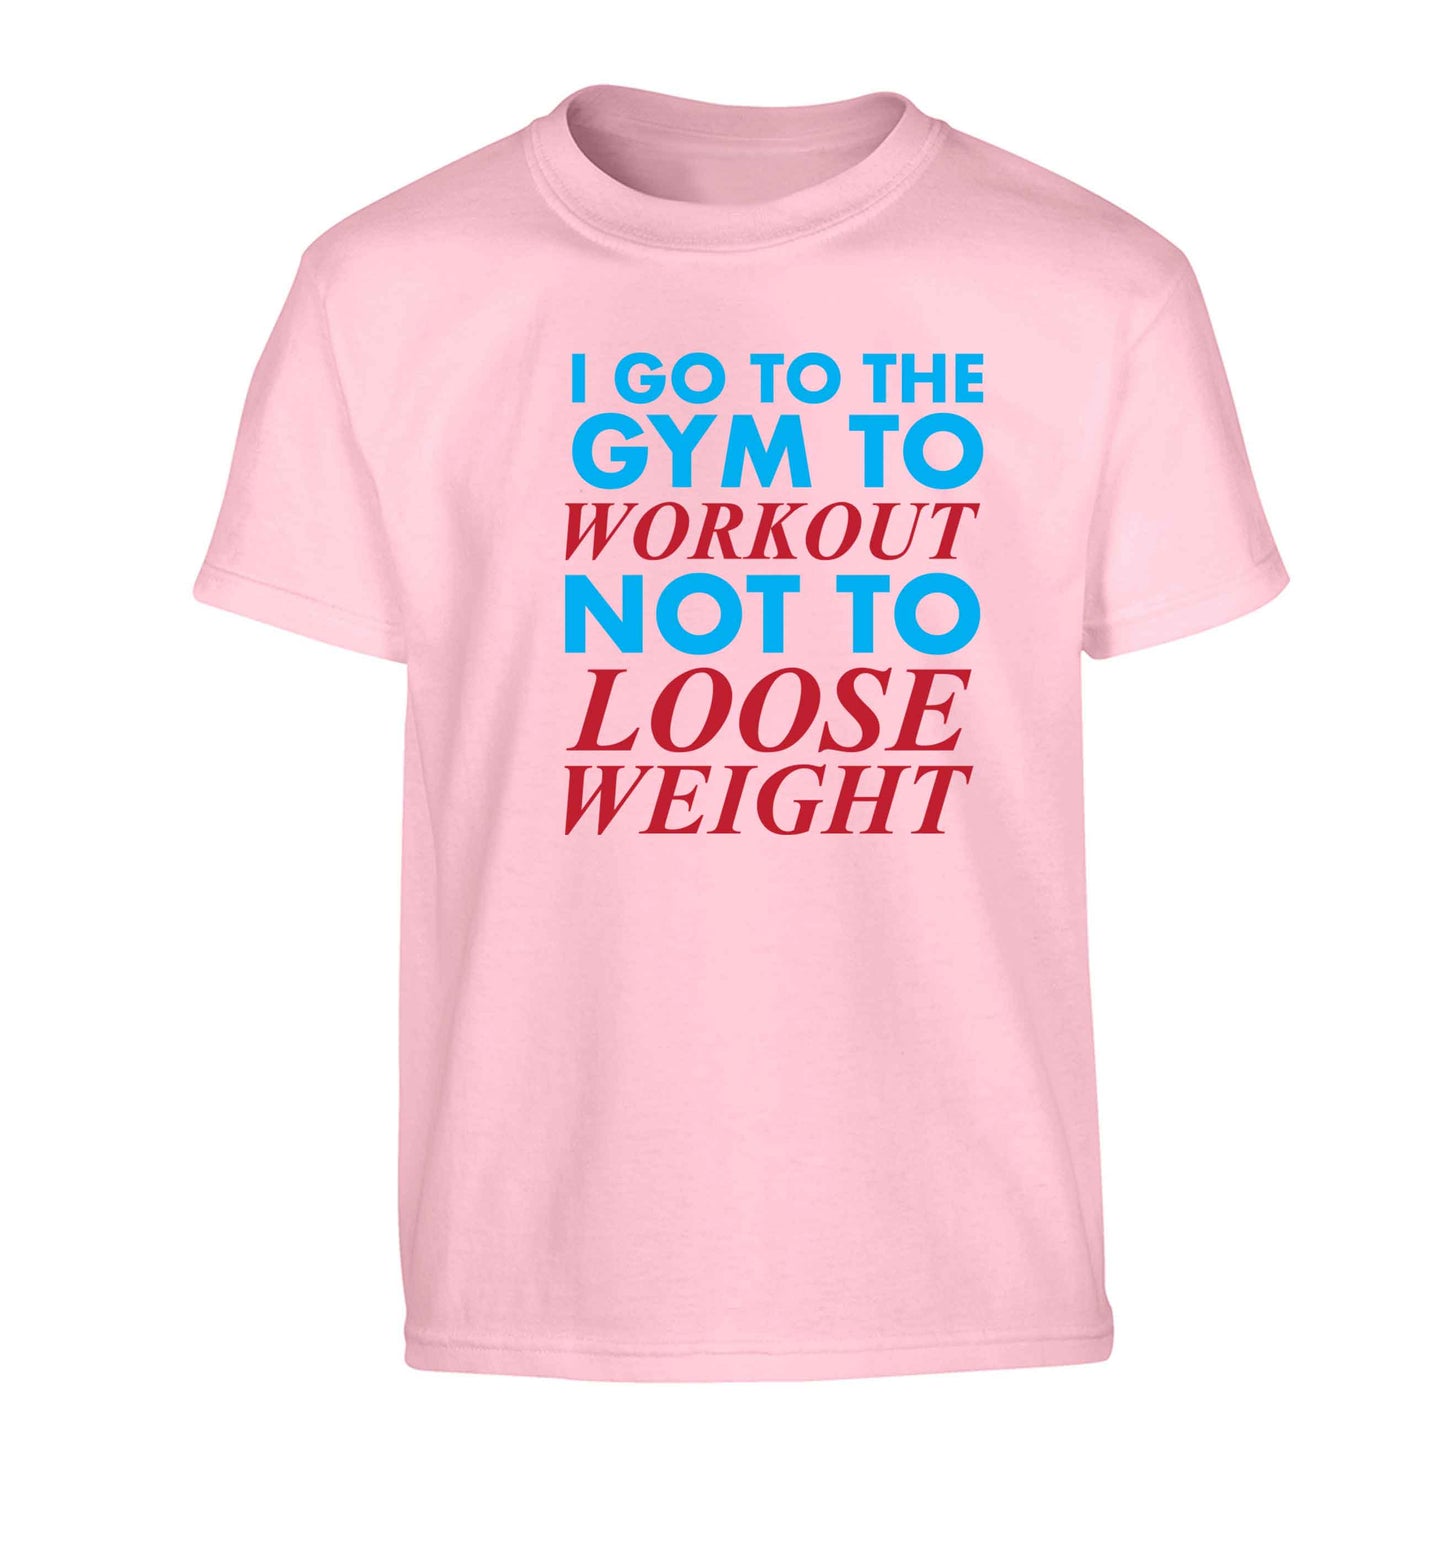 I go to the gym to workout not to loose weight Children's light pink Tshirt 12-13 Years